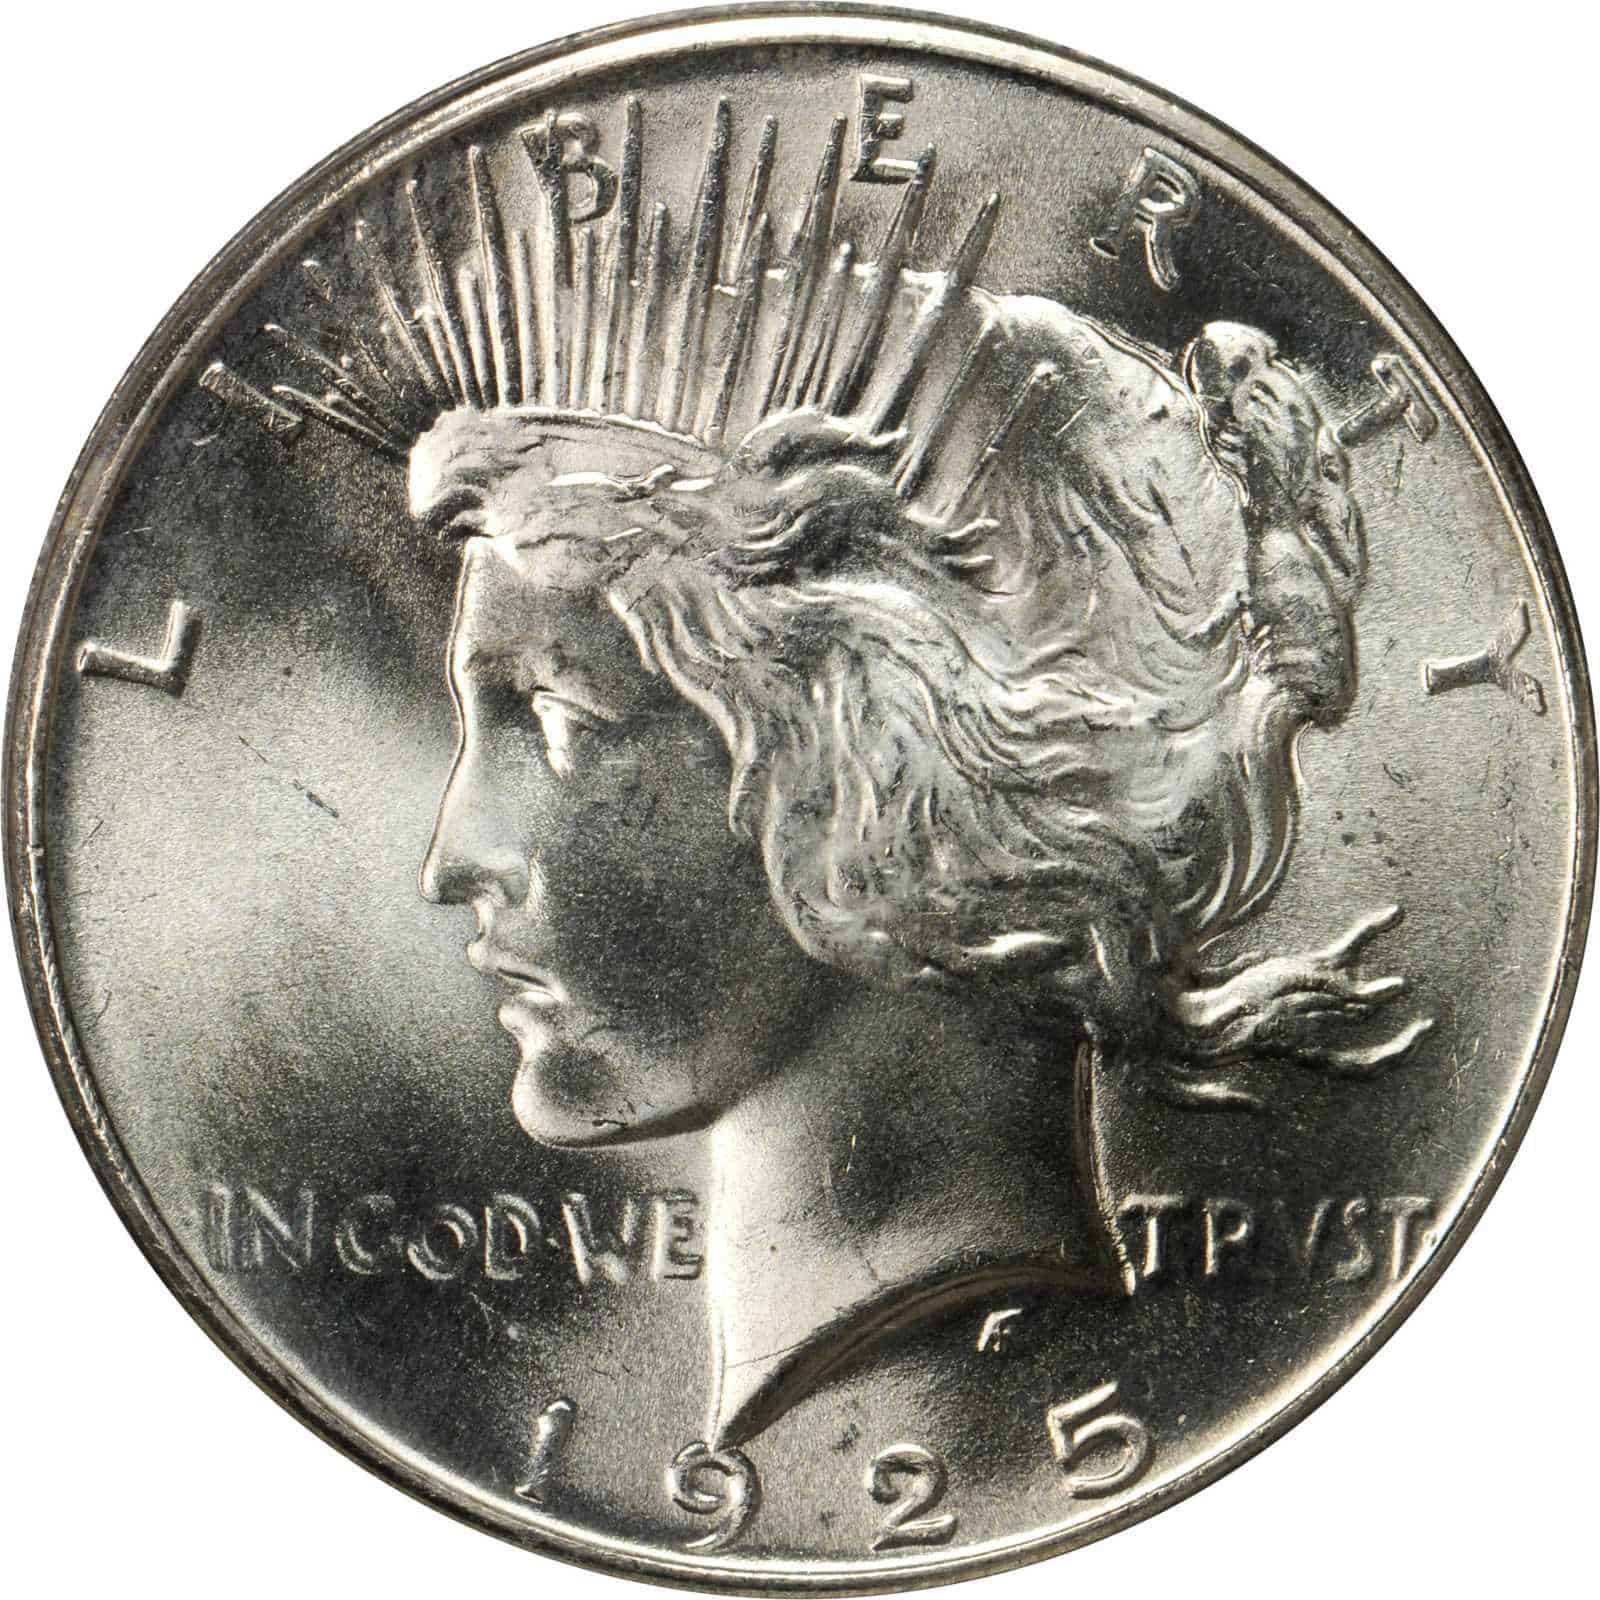 The Obverse of the 1925 Silver Dollar